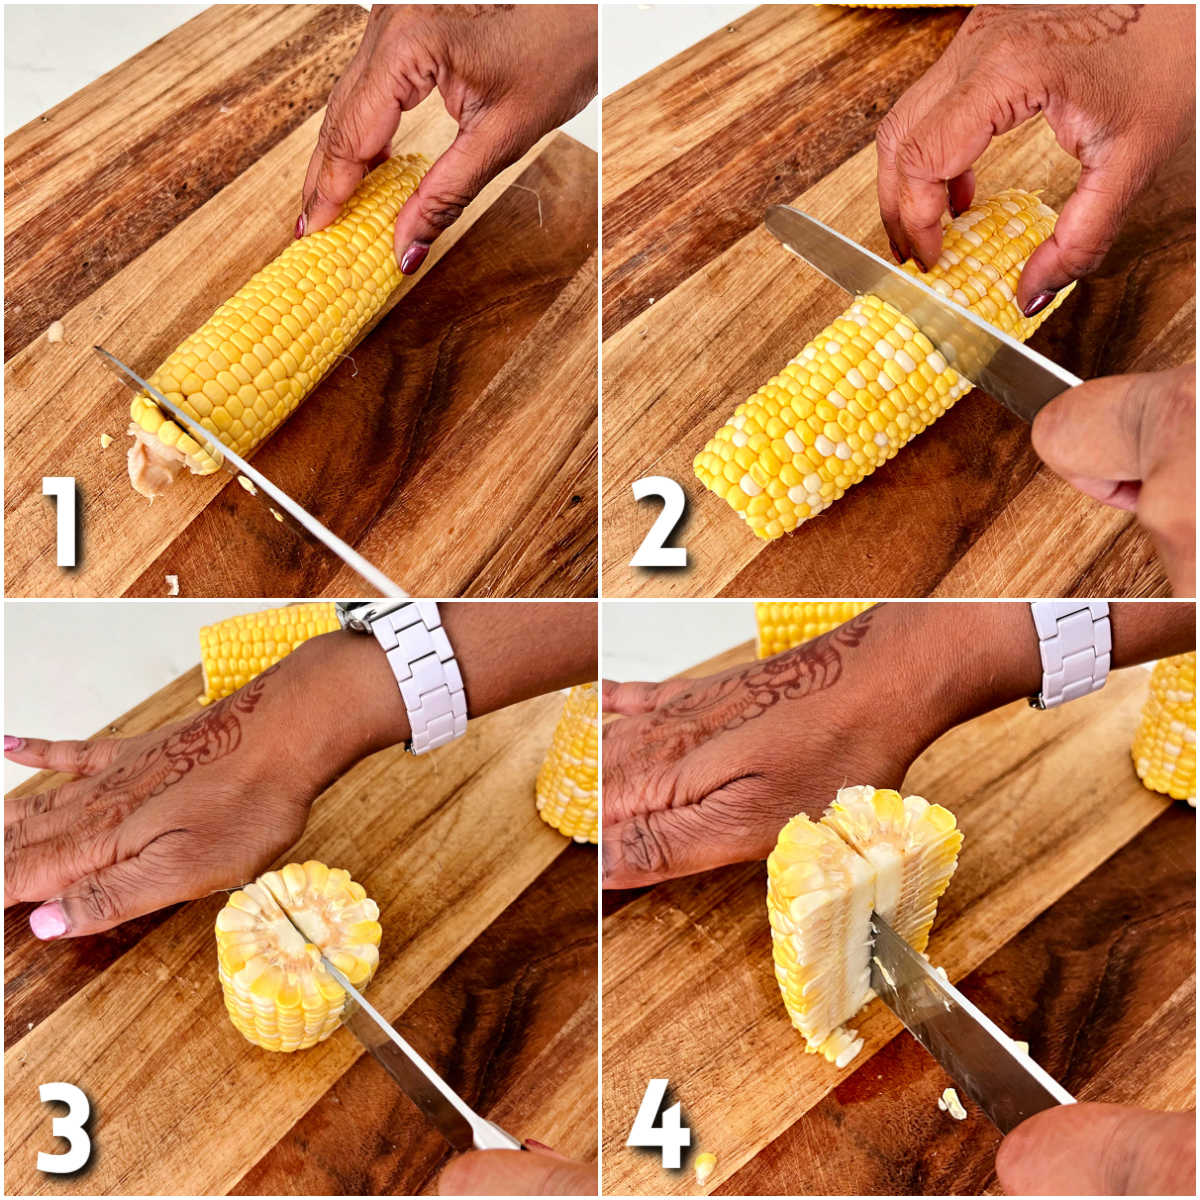 Steps 1-4 for making corn ribs